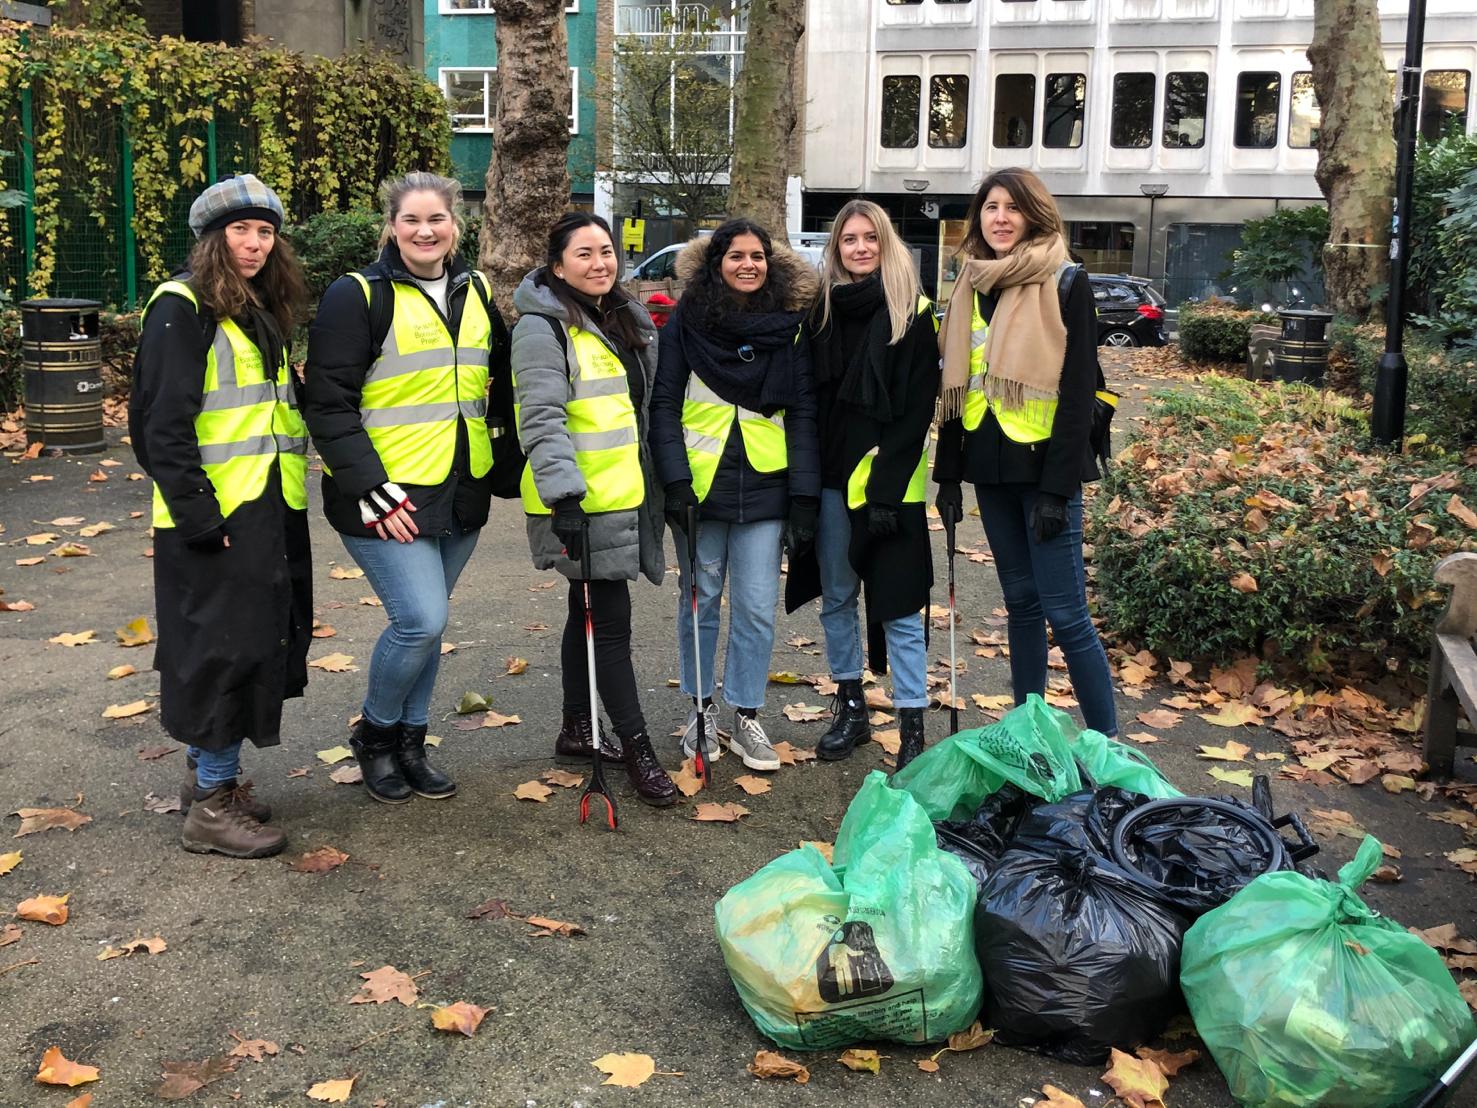 In 2019, WBC and JuniorISIT teamed up to collect 8 bags of litter across City of Westminster, as part of MeGoGreen campaign. 